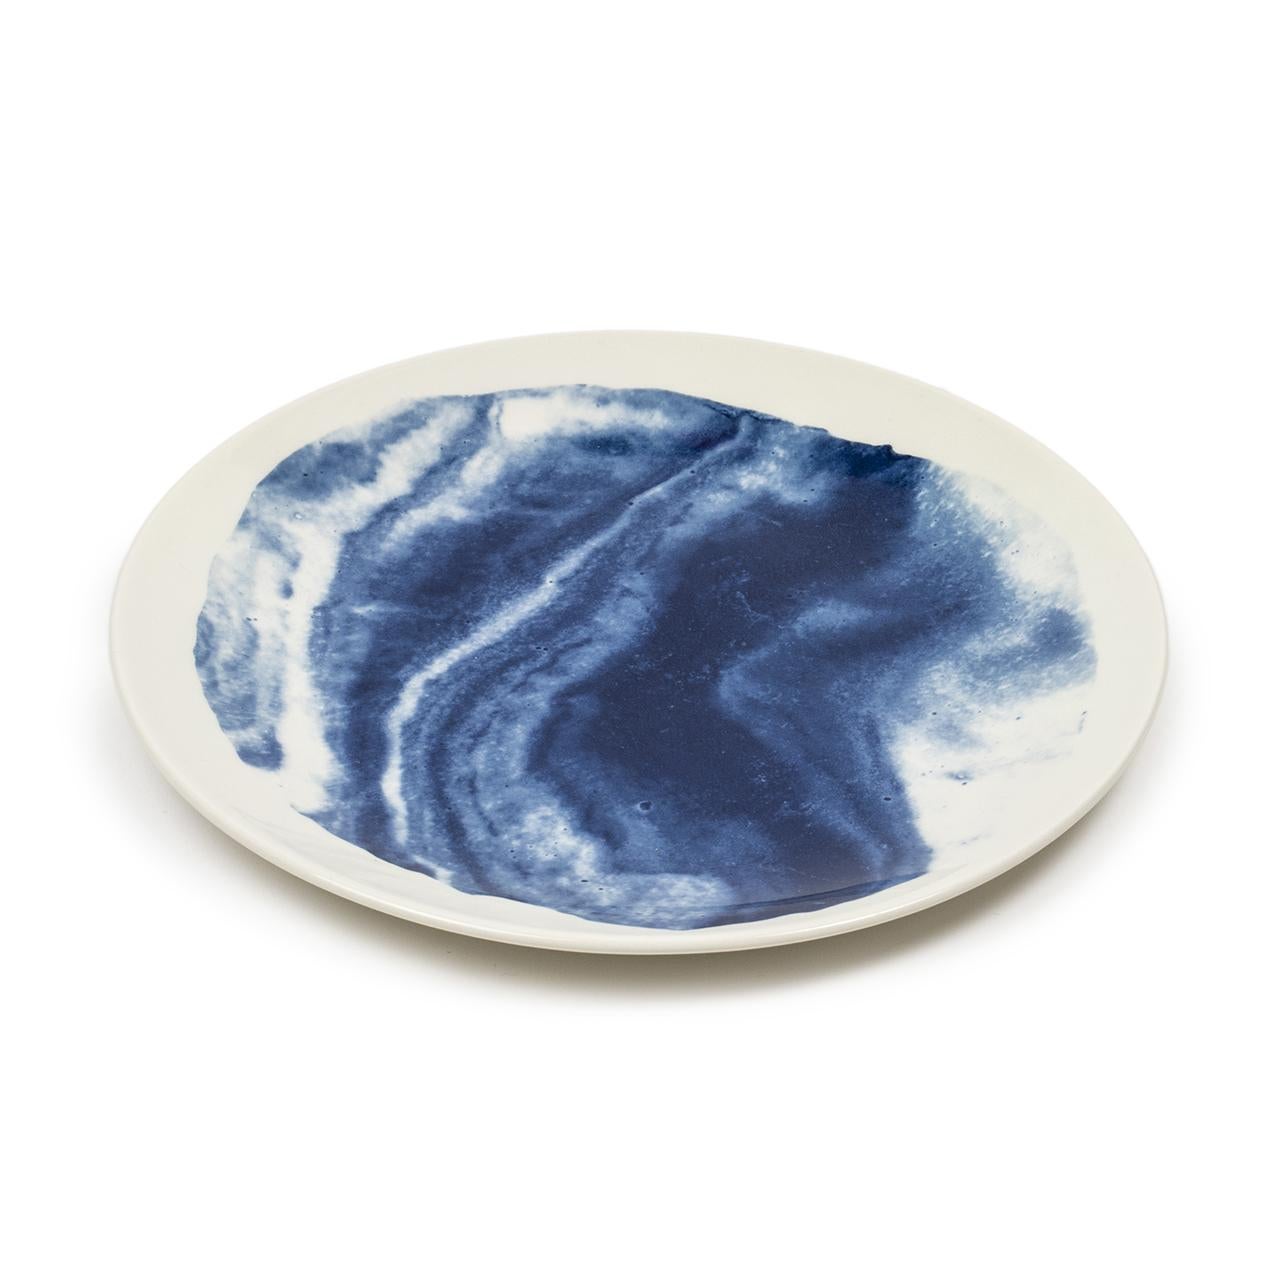 Modern Earthenware Salad Plate with Interpretations of Traditional Creamware For Sale